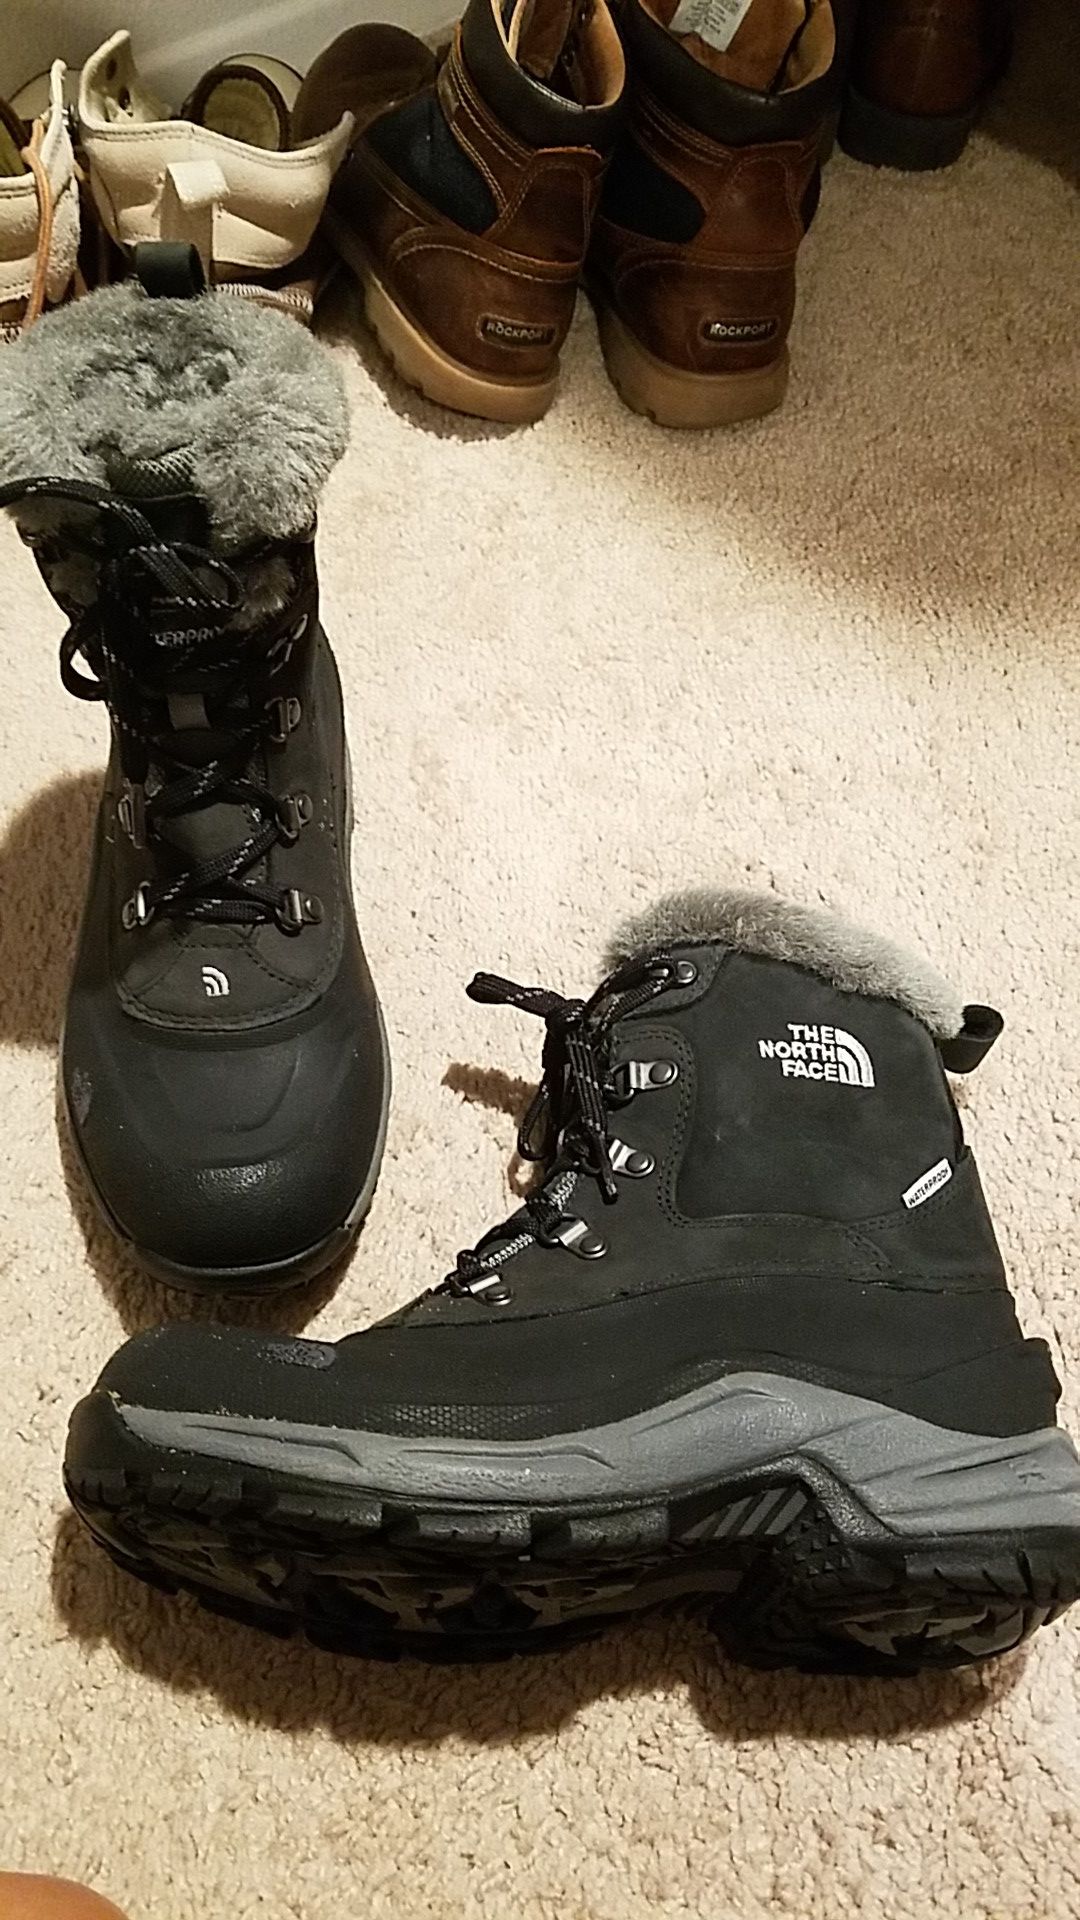 North face boots